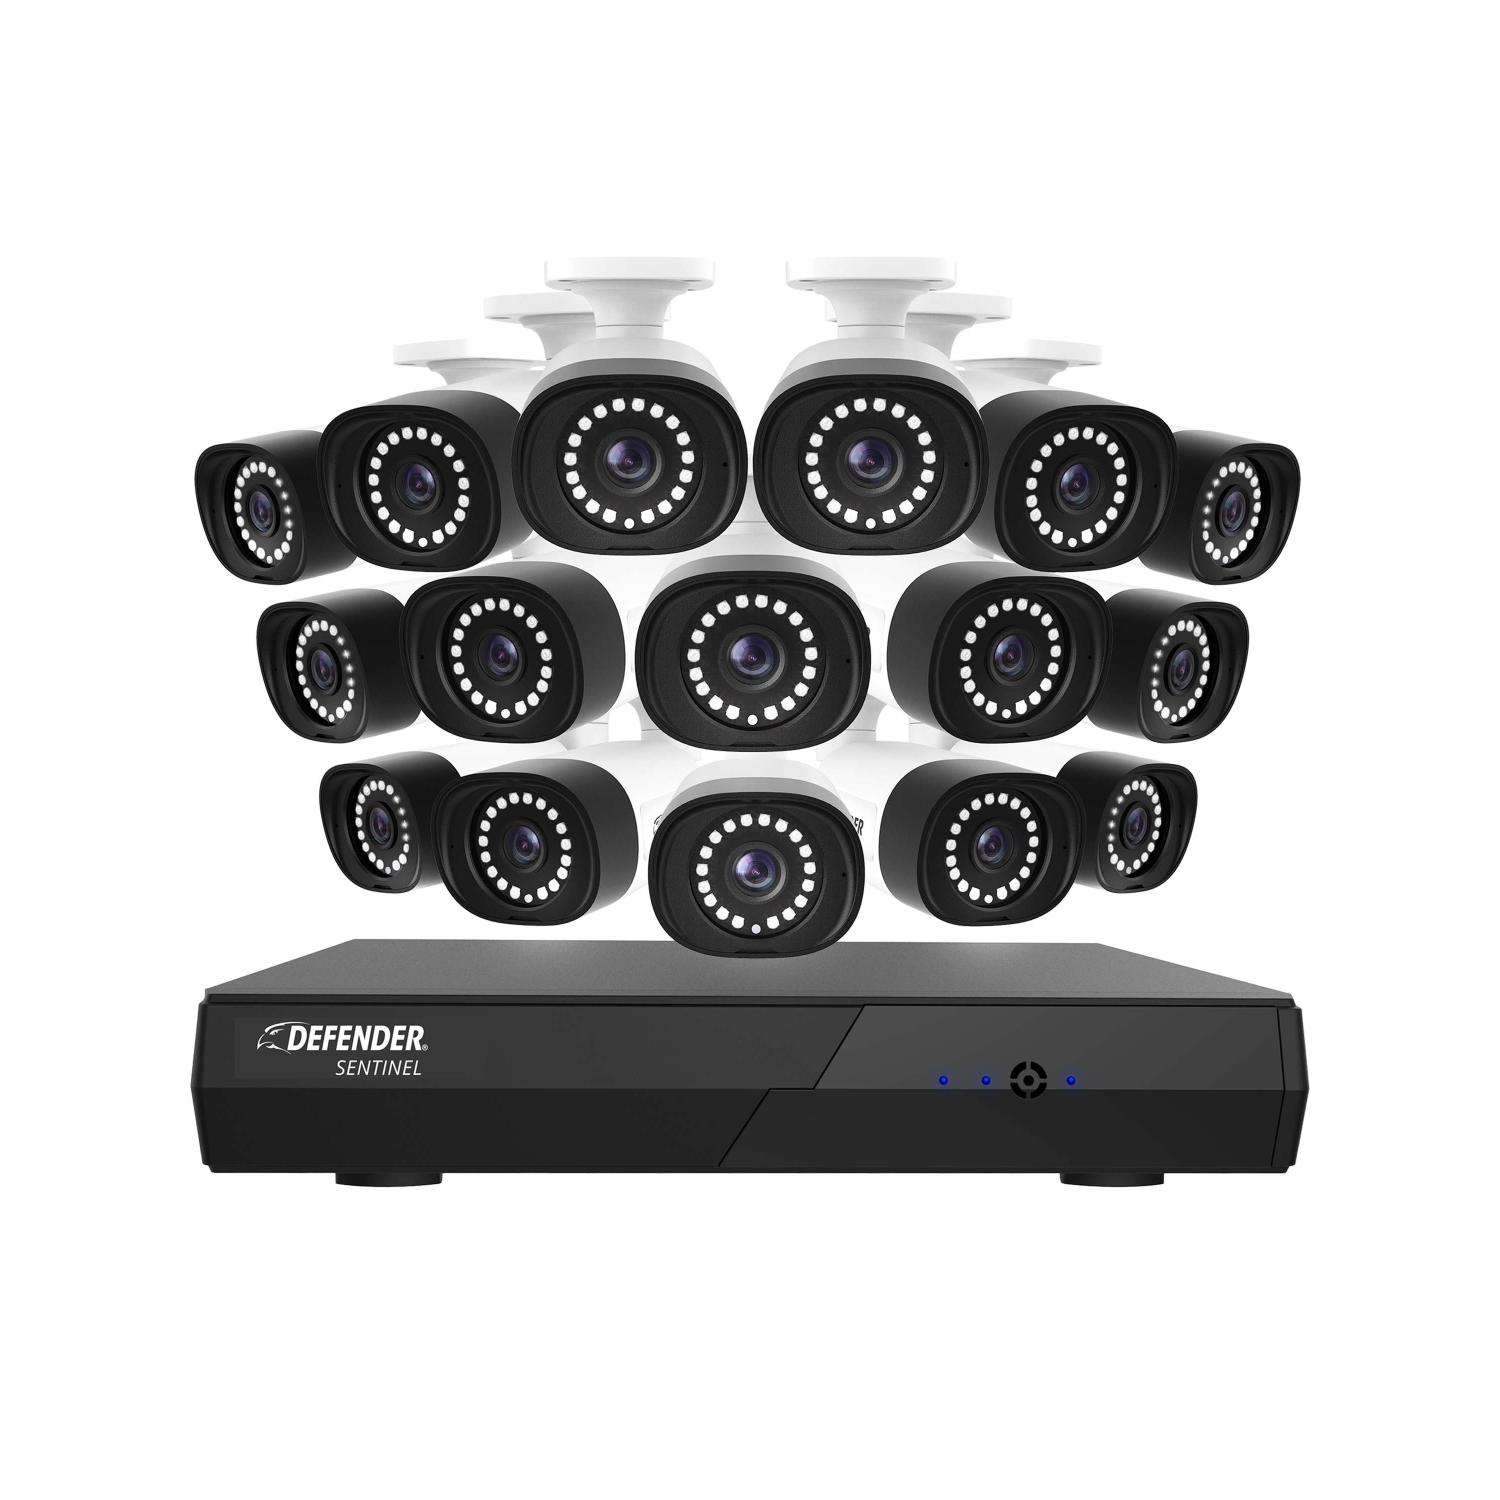 Defender Sentinel 4K Ultra HD POE Wired 1TB NVR Security System With 16 Metal Cameras, Smart Human Detection, Color Night Vision & Mobile App